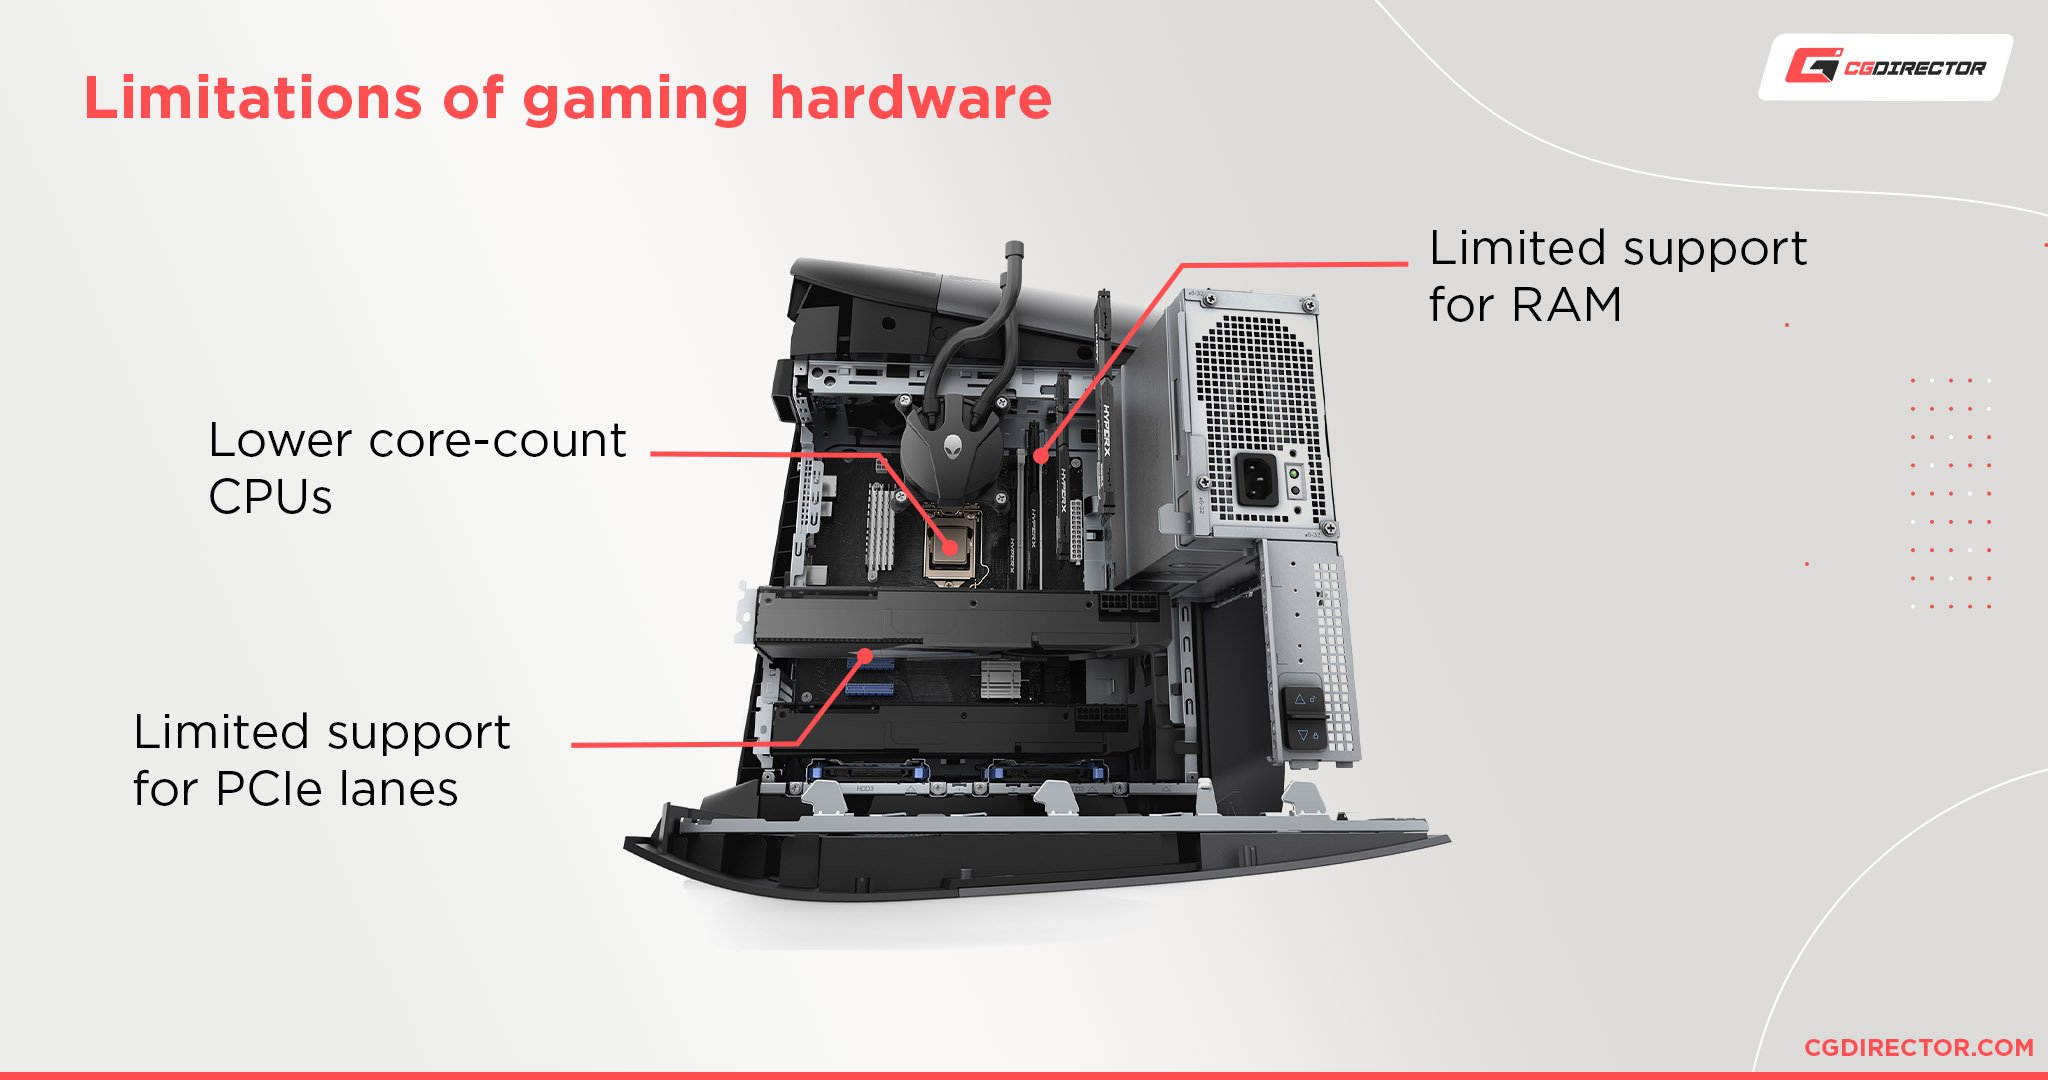 Limitations of Gaming Hardware for professional workloads